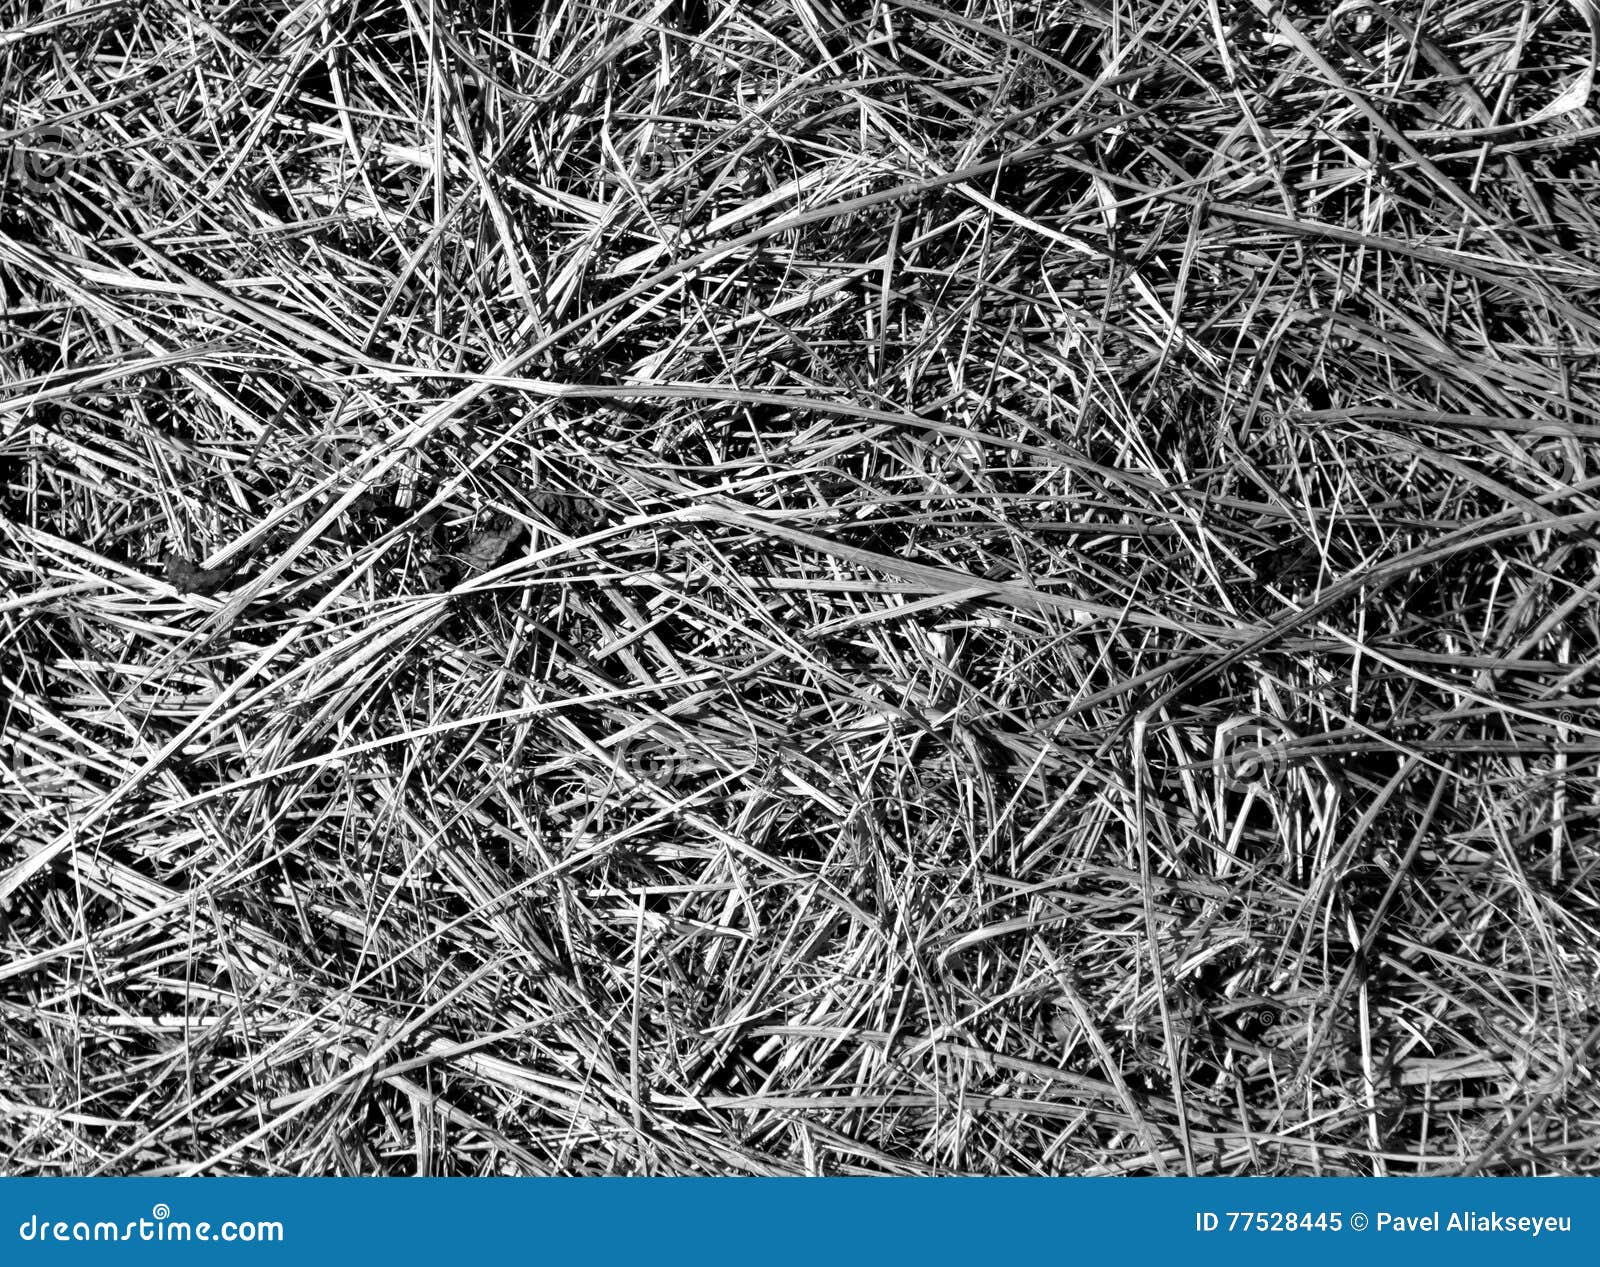 Dry Grass Texture In Black And White Stock Image Image Of Monochrome Color